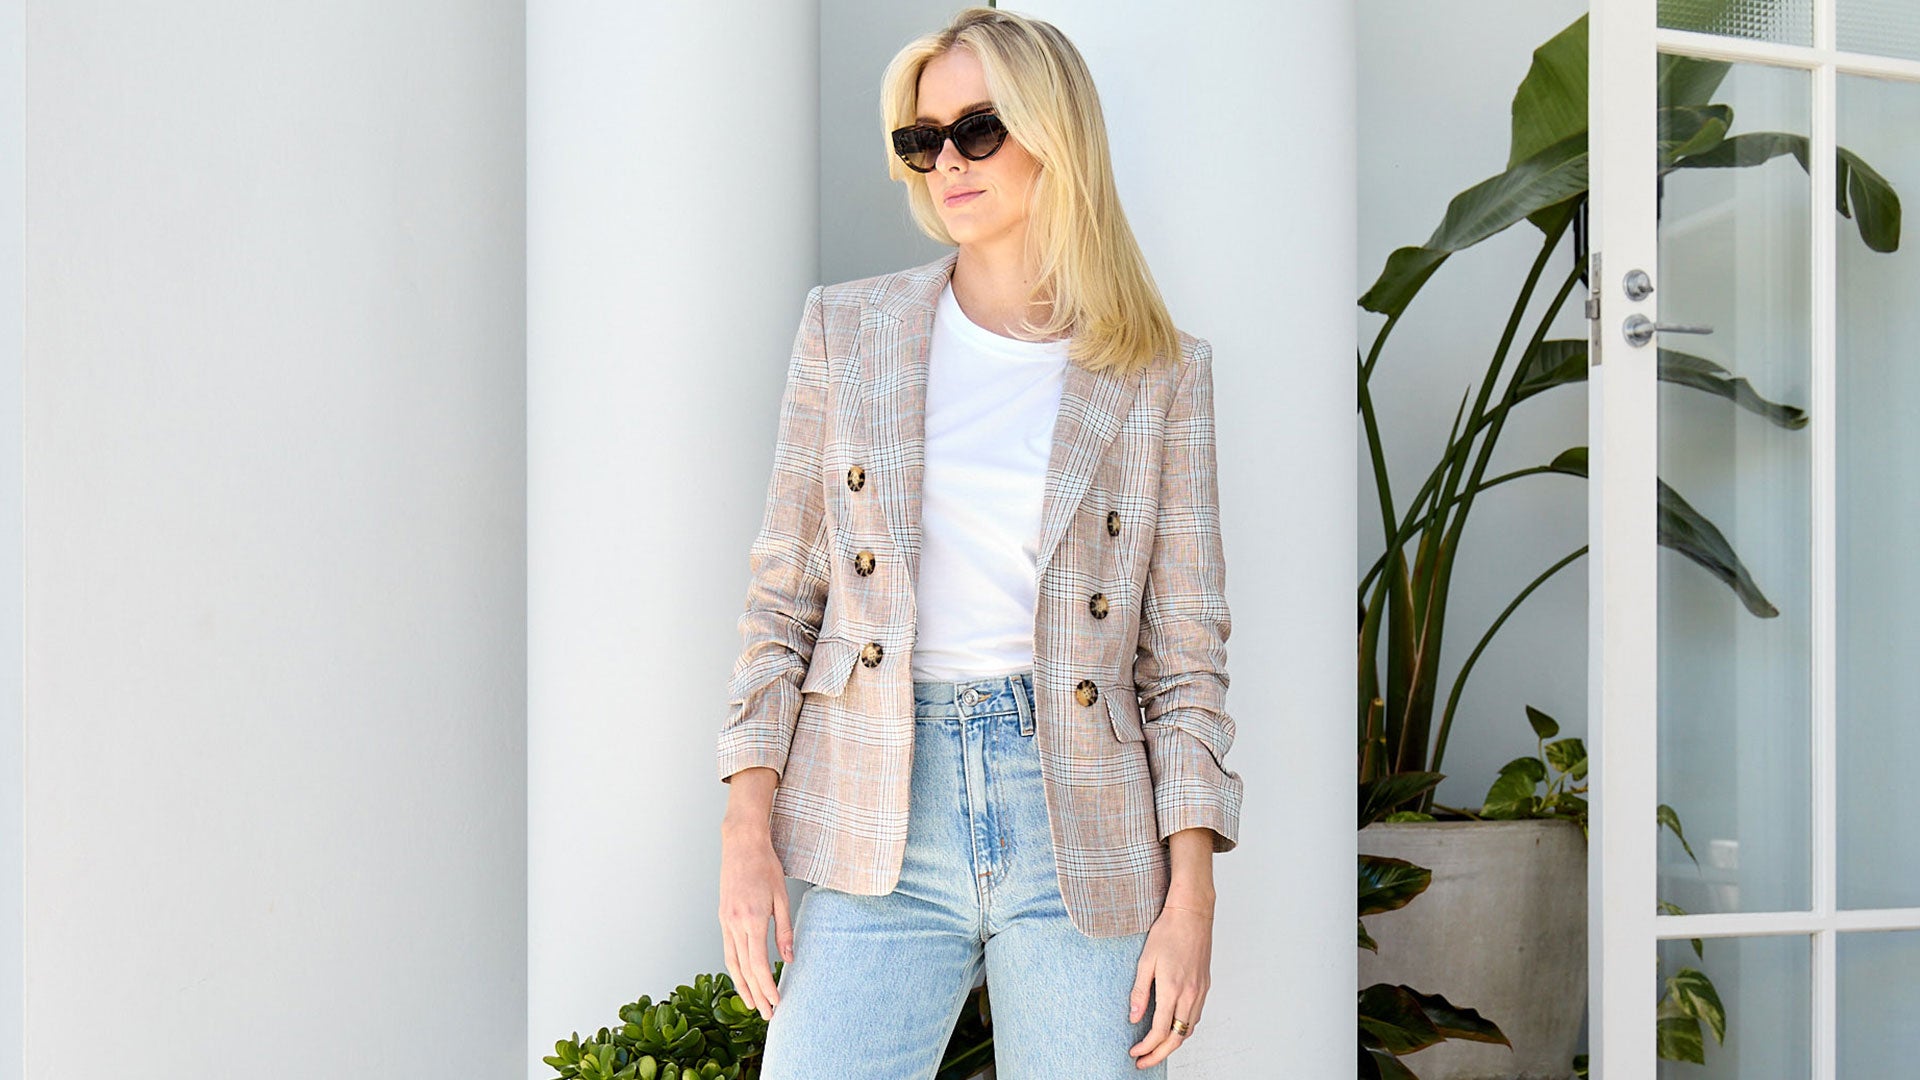 Get the look with Veronica Beard